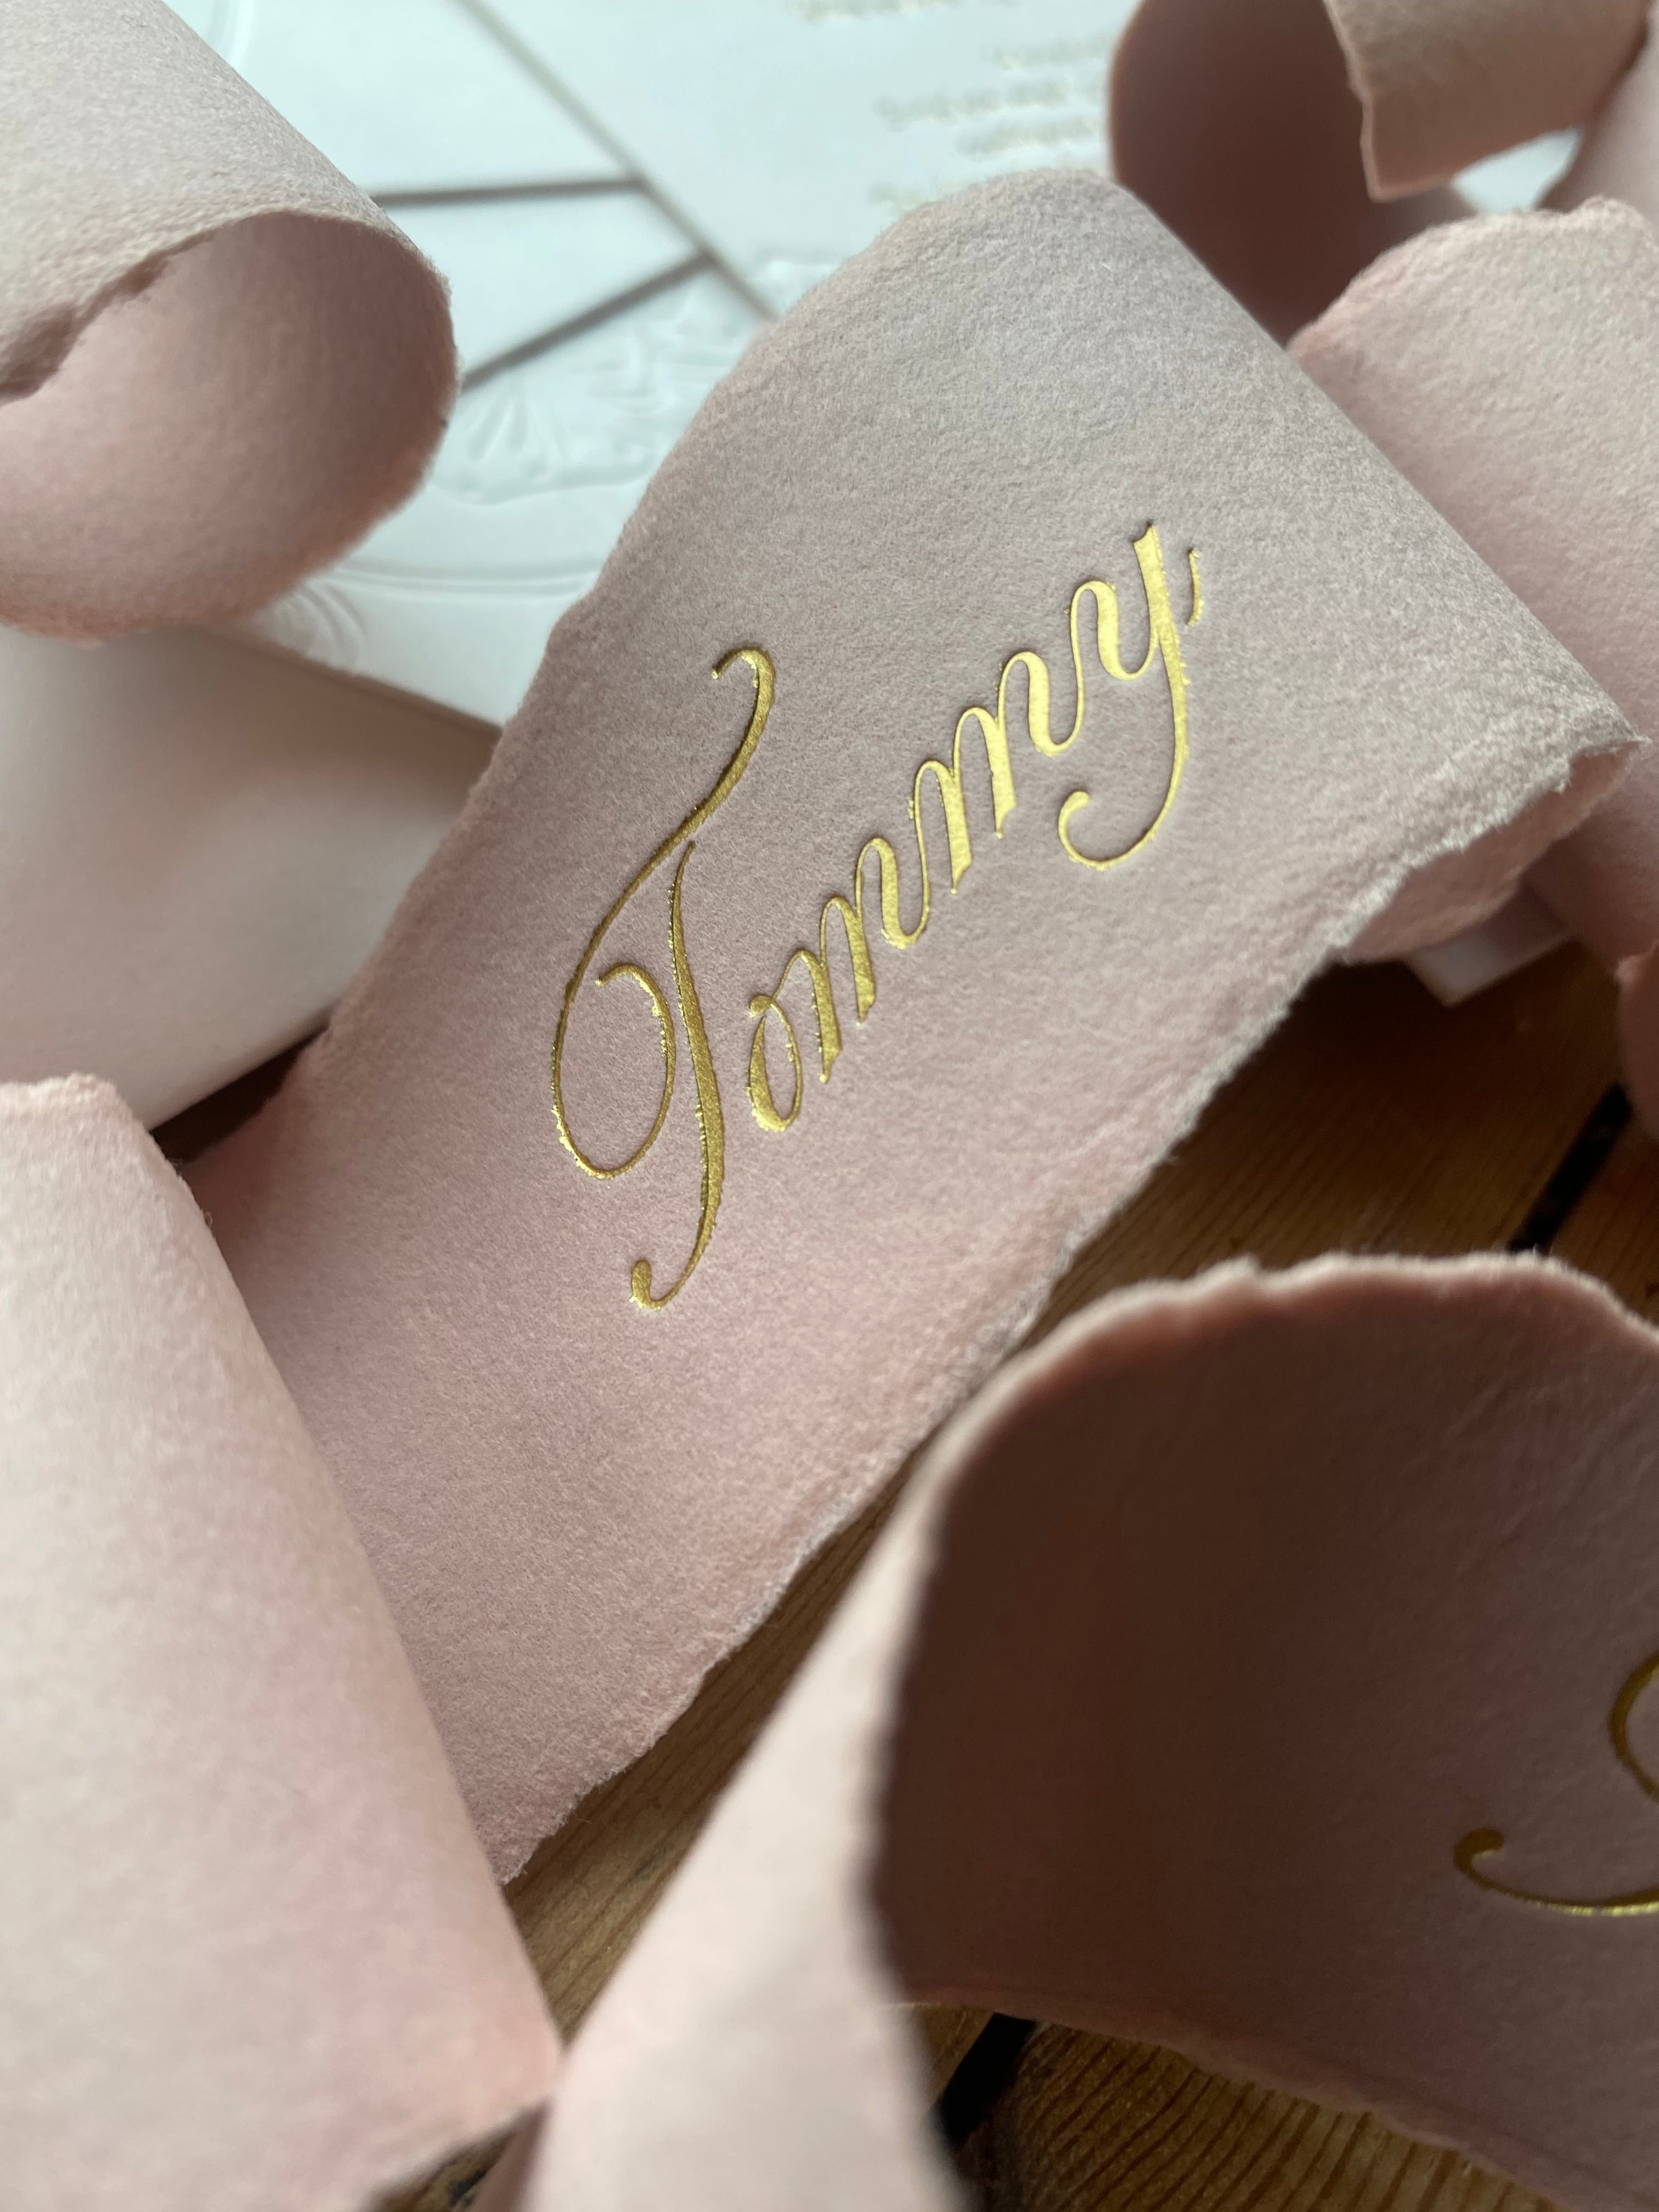 Looking to add elegance to your wedding invitations? Explore hot foil printing on handmade paper in our latest blog post for inspiration.